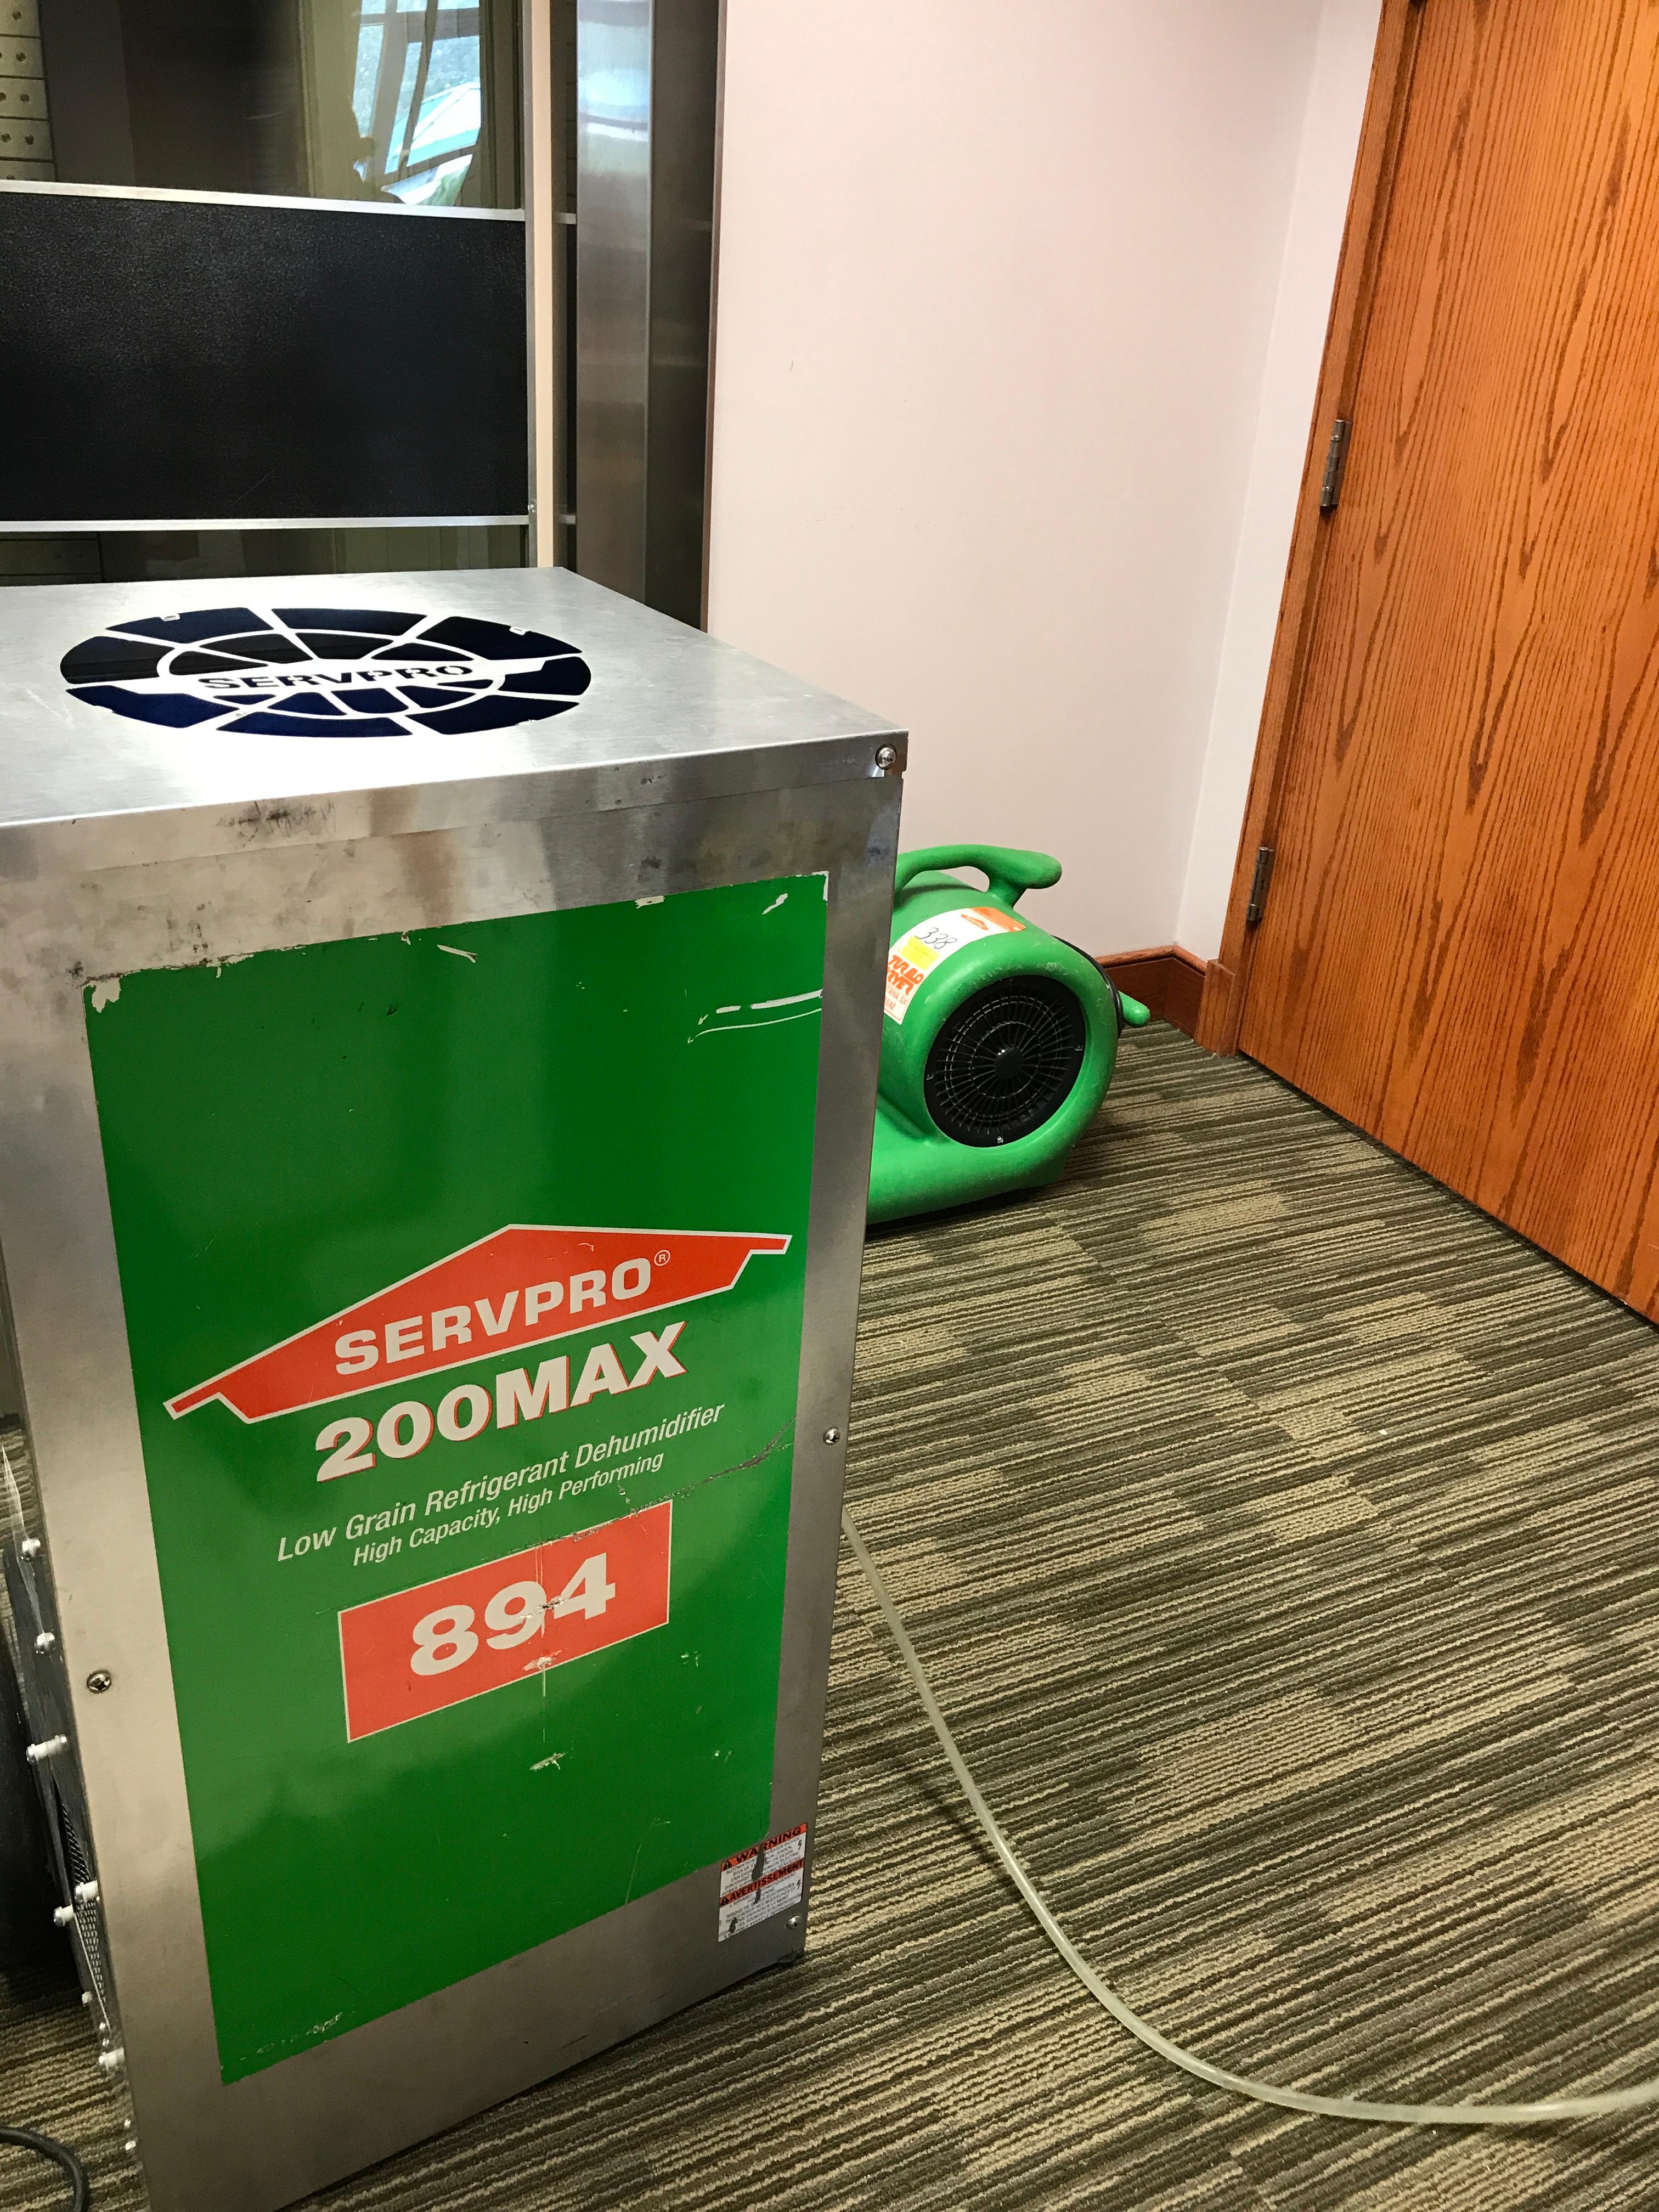 Got the SERVPRO equipment set up and running after a commercial loss.